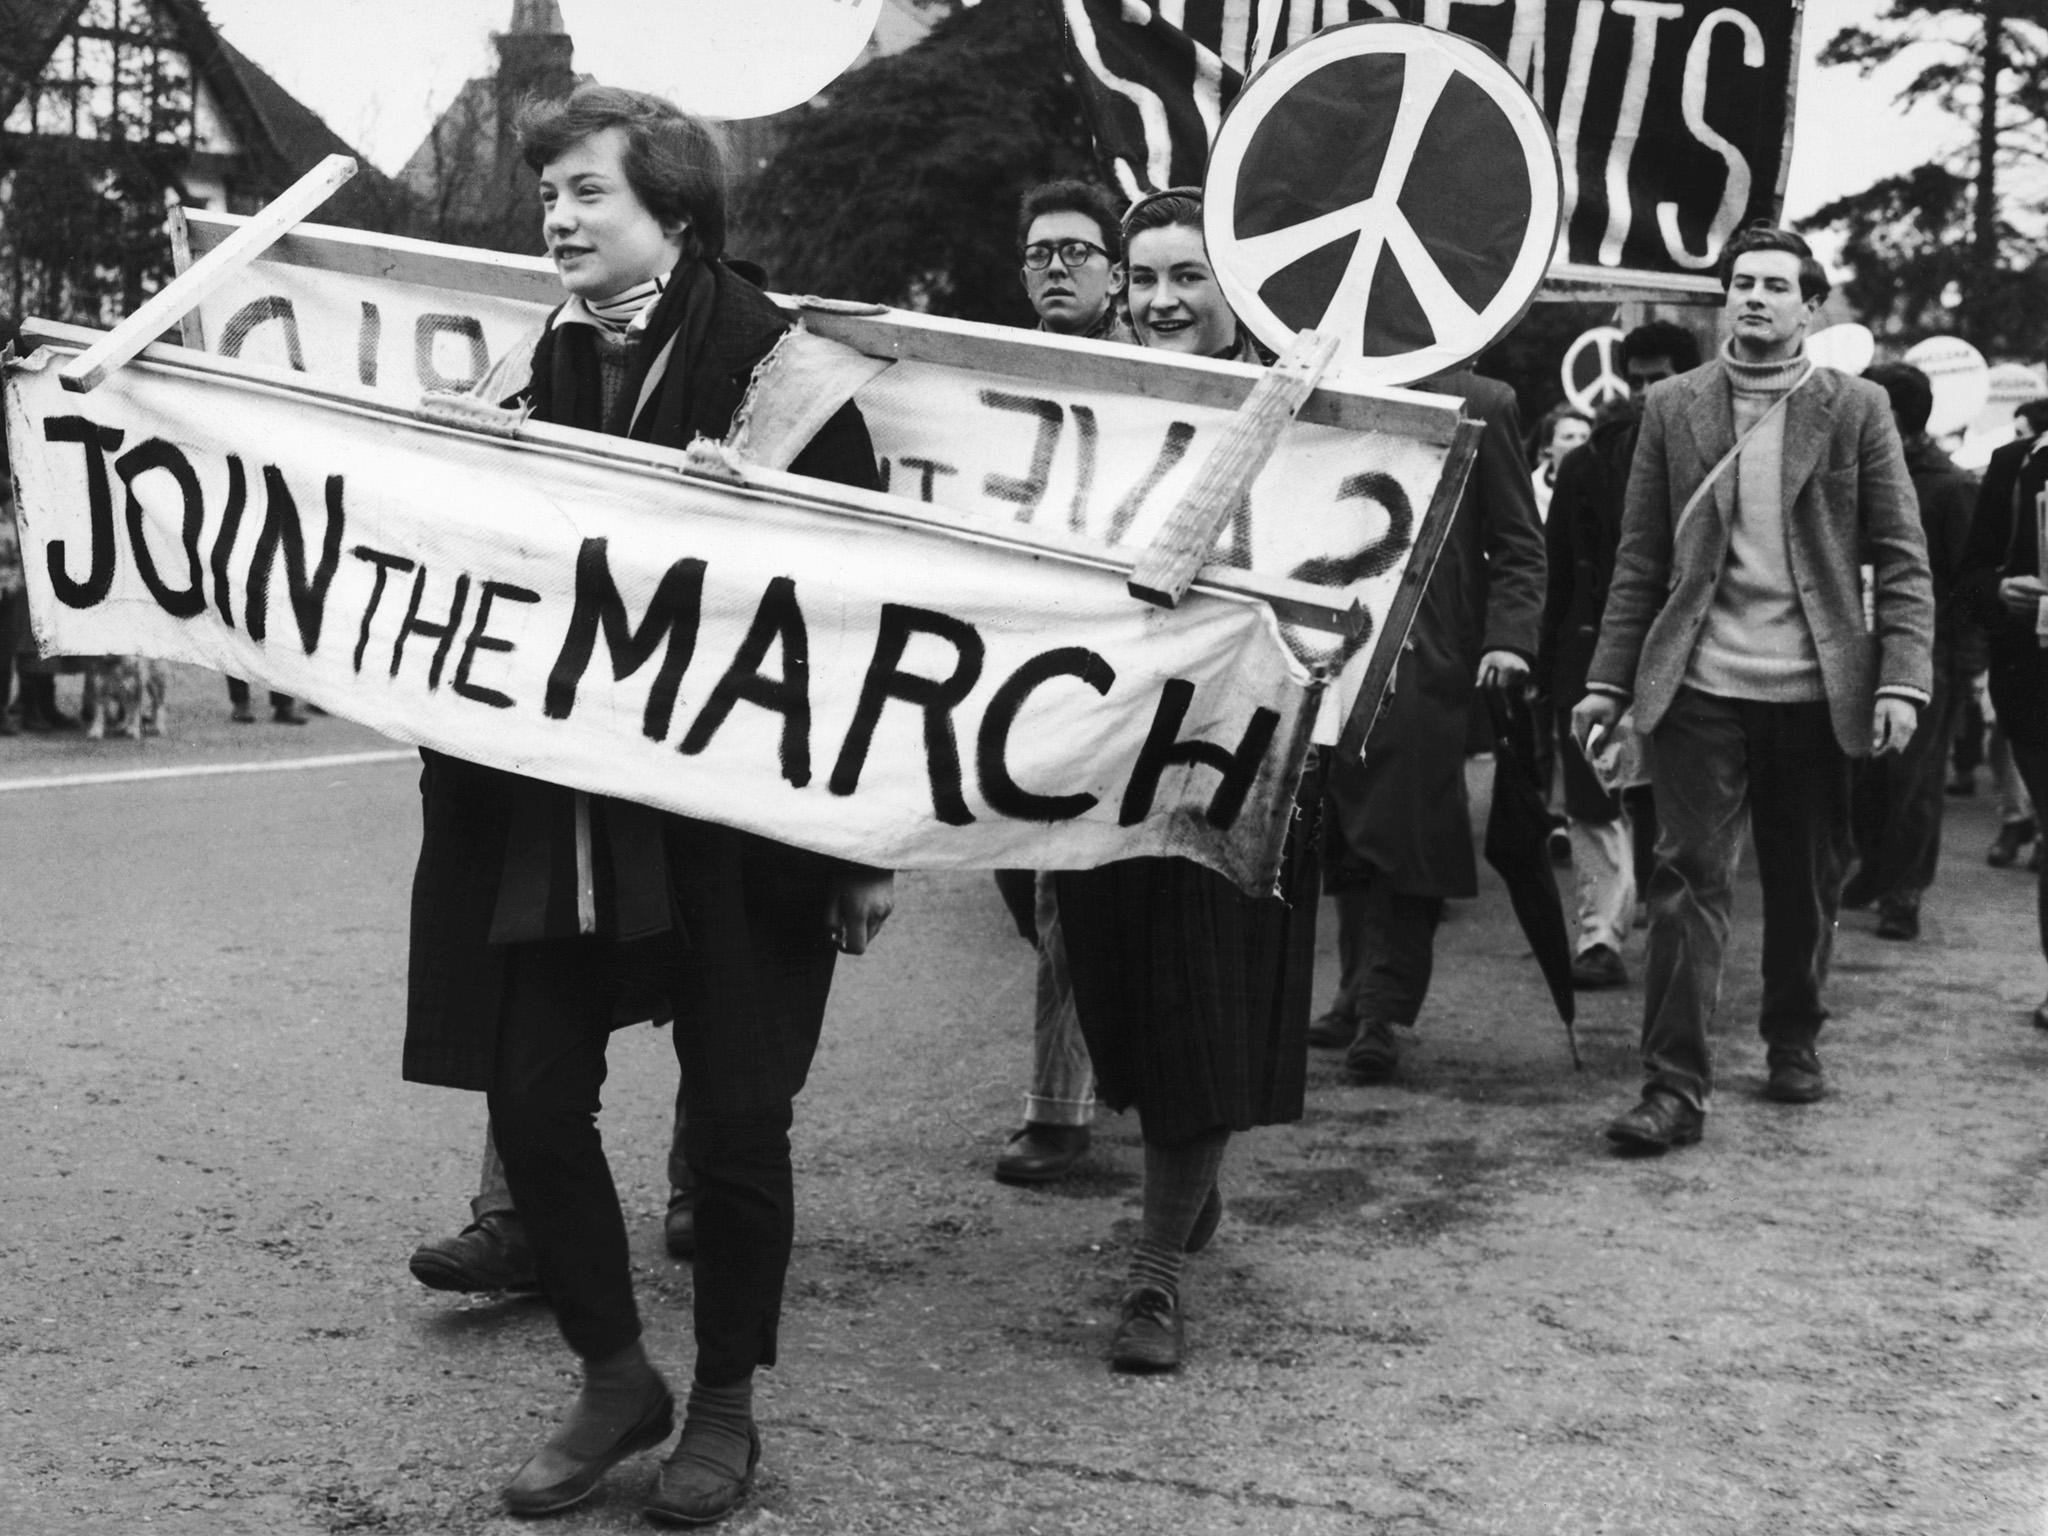 Campaign for Nuclear Disarmament demonstrators leaving Maidenhead on their march from London to Aldermaston Atomic Weapons Research Establishment in Berkshire, 1958